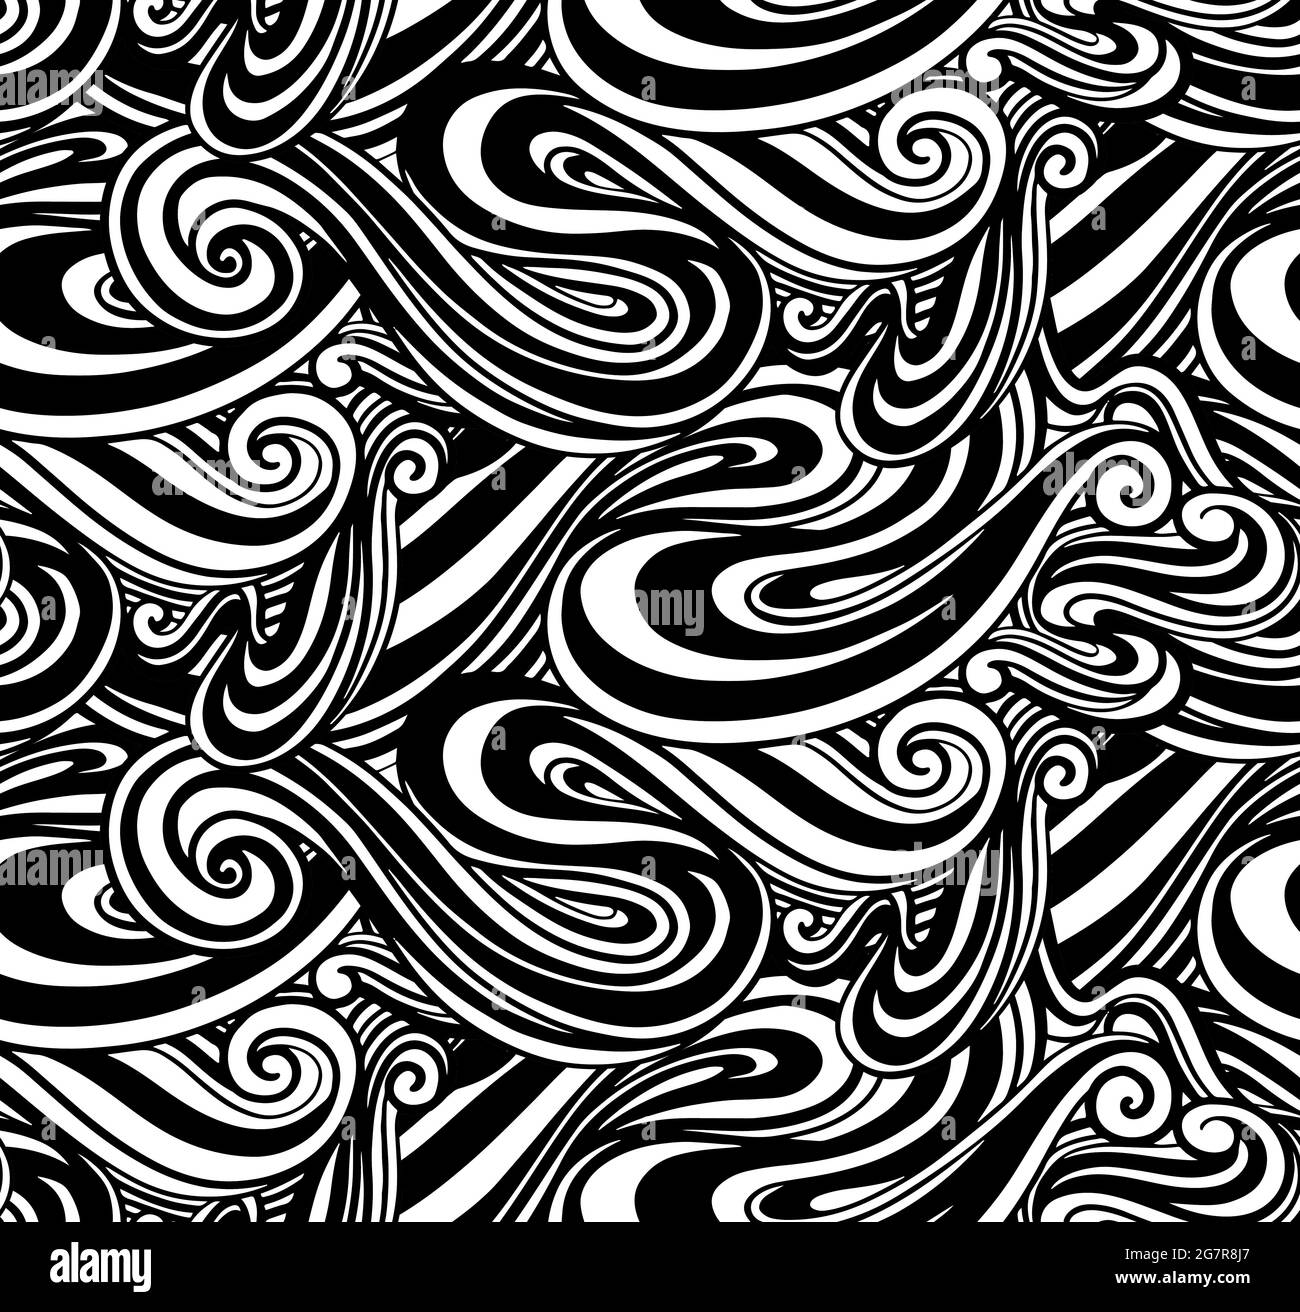 Seamless pattern wave abstract.Line drawing style.Fashion textile fabric. Stock Vector